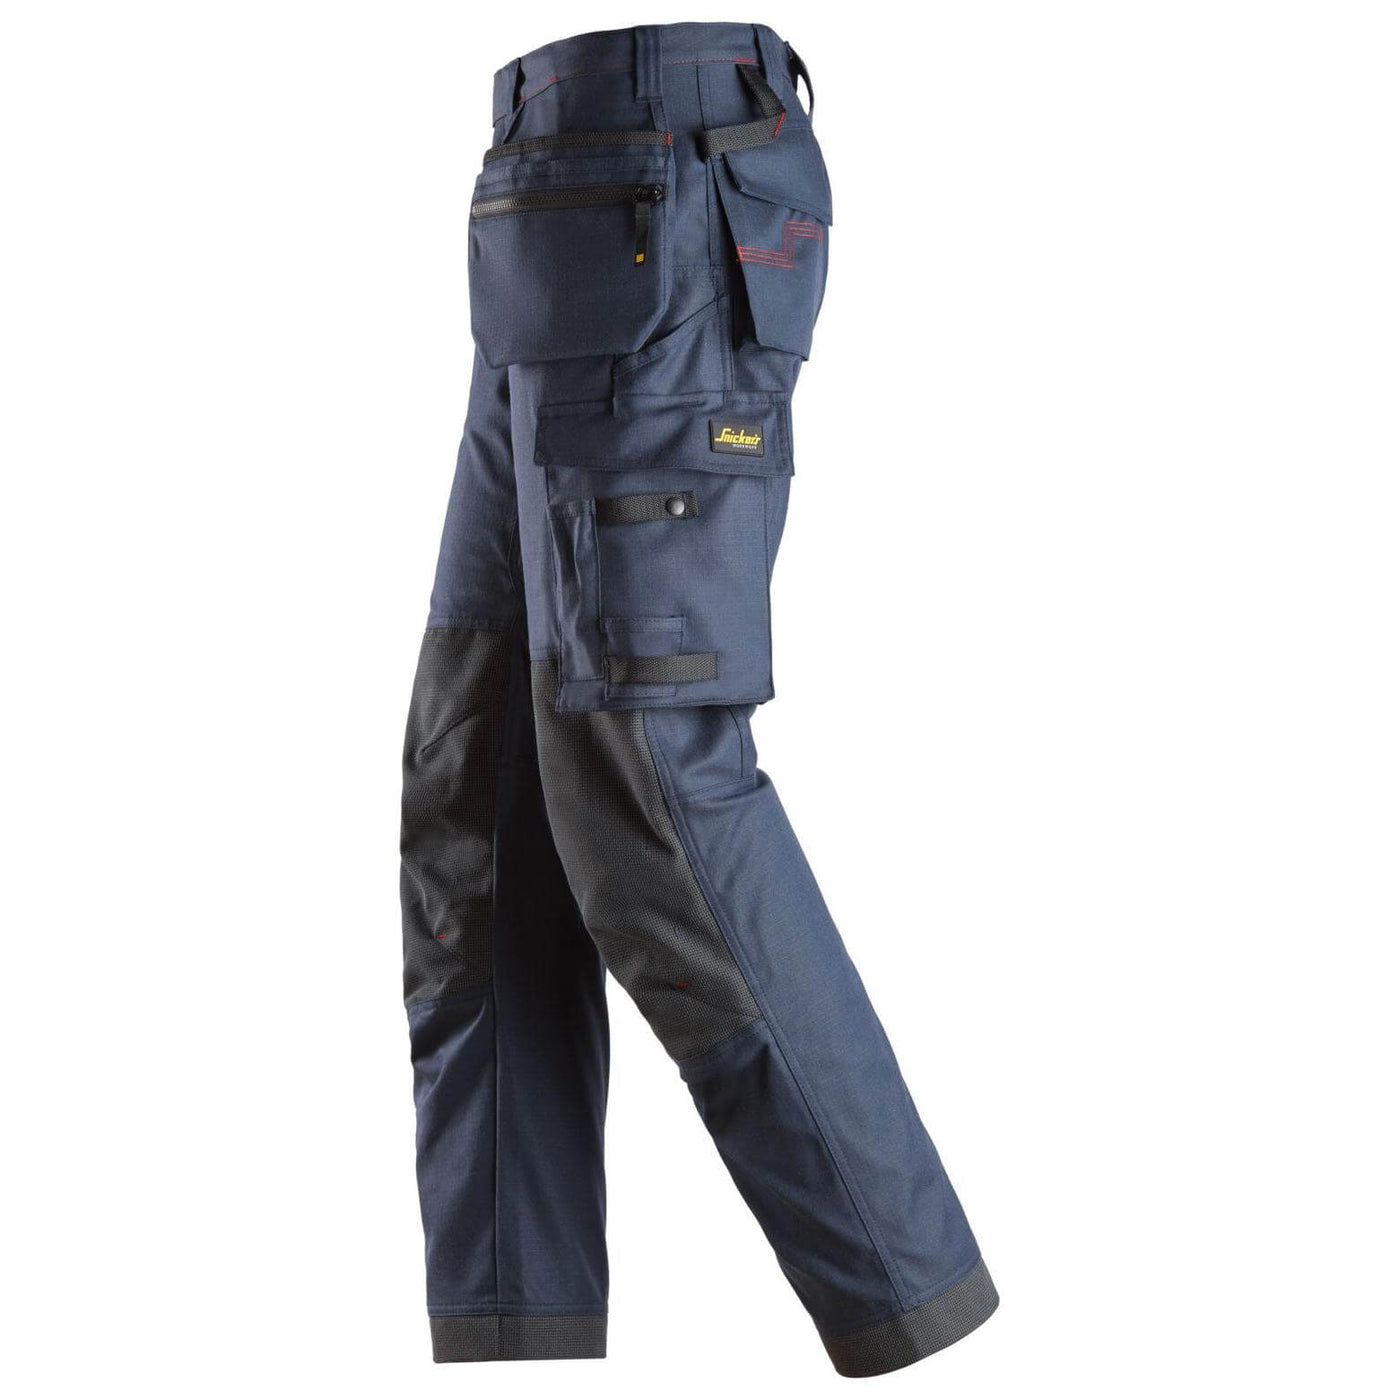 Snickers 6262 ProtecWork Work Trousers with Holster Pockets and Equal Leg Pockets Navy left3710029 #colour_navy